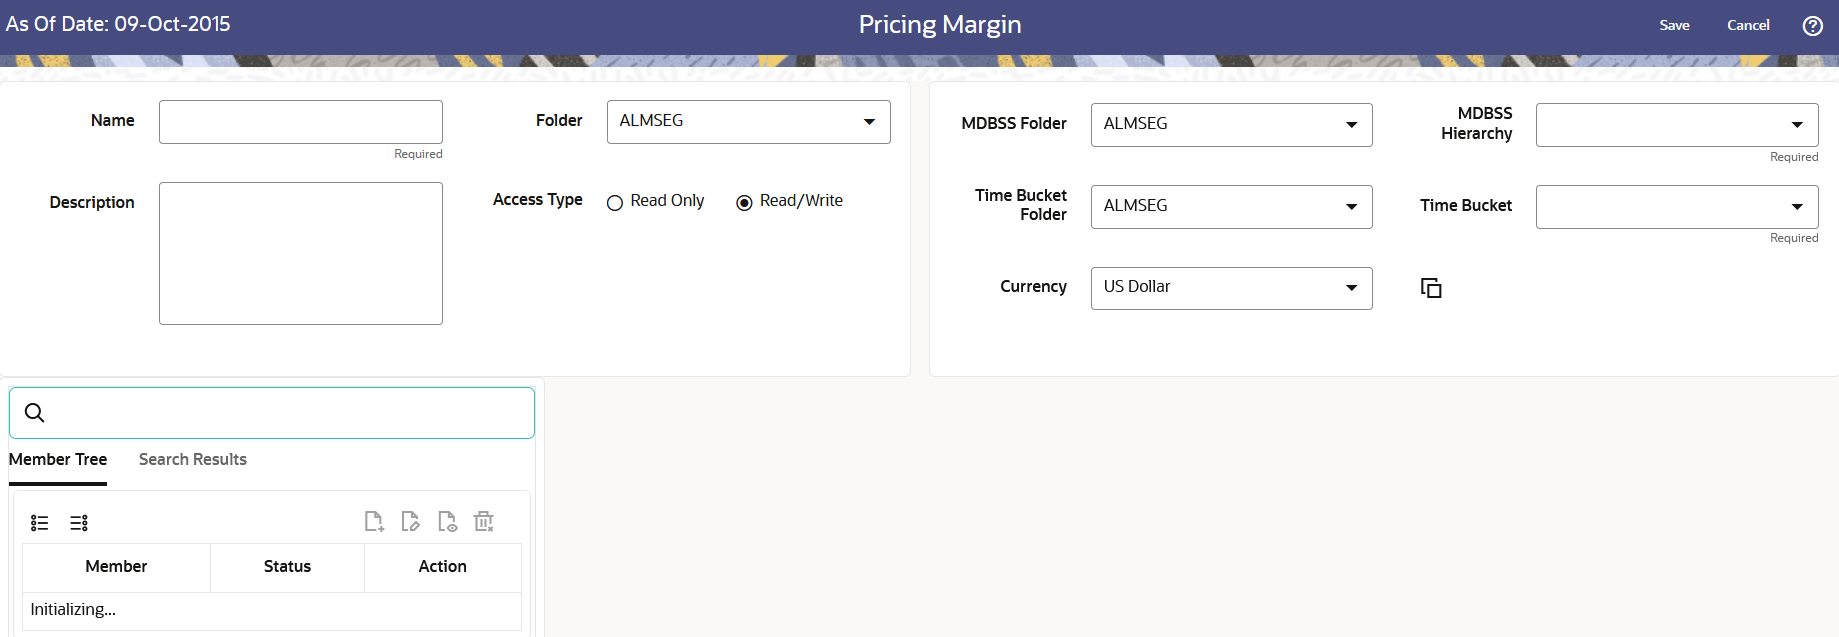 Pricing Margin Page